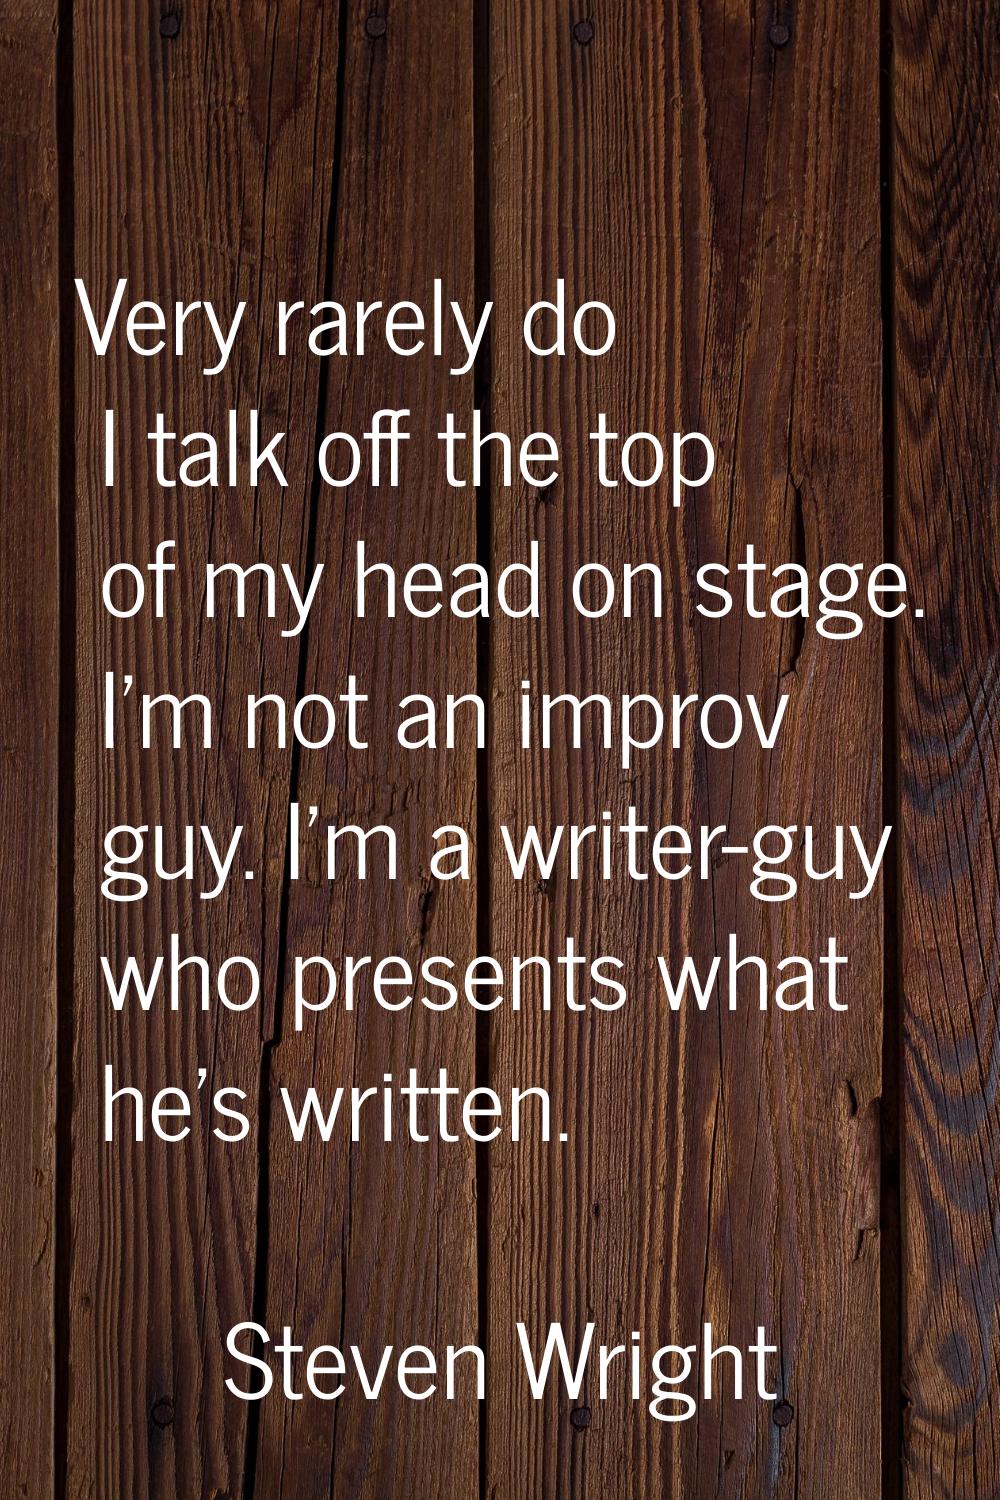 Very rarely do I talk off the top of my head on stage. I'm not an improv guy. I'm a writer-guy who 